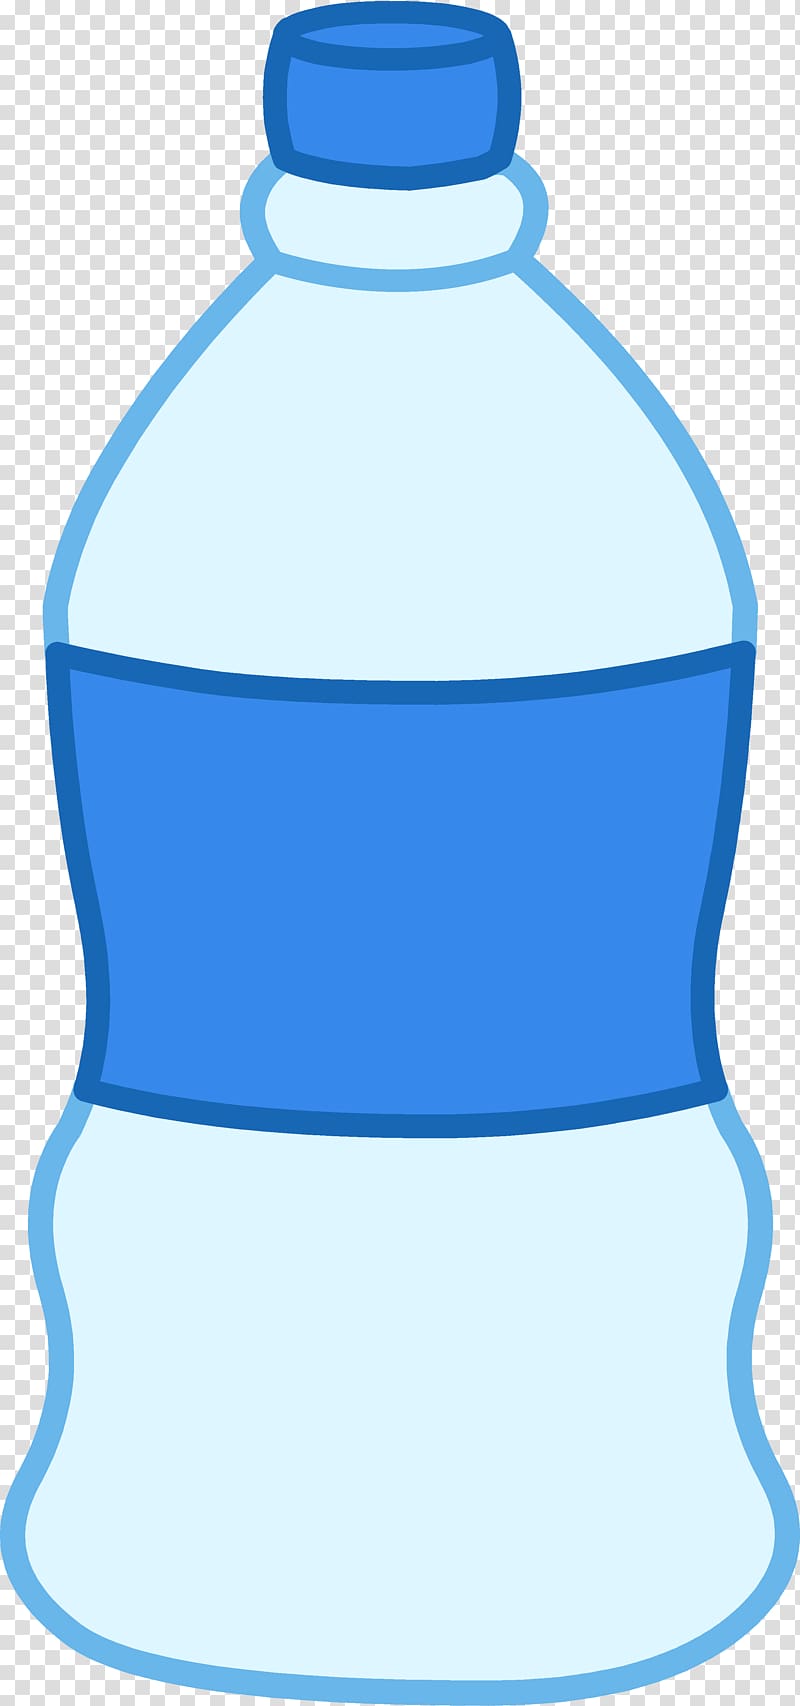 Water bottle Dasani Bottled Water , Gallon Container transparent background PNG clipart